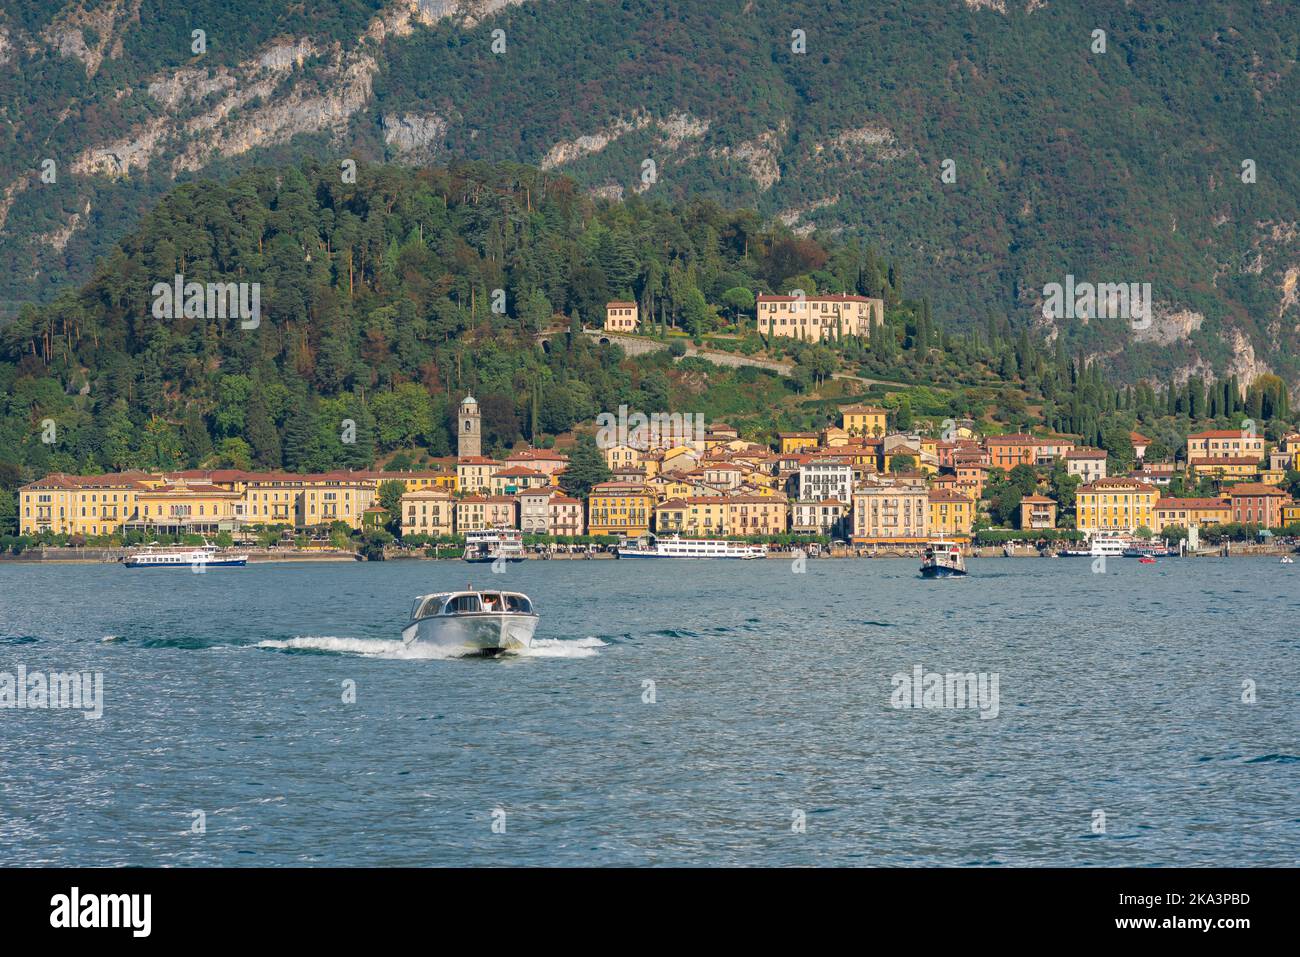 Scenic Italian lake, view in summer of a speedboat crossing Lake Como against the backdrop of the picturesque lakeside town of Bellagio, Italy Stock Photo